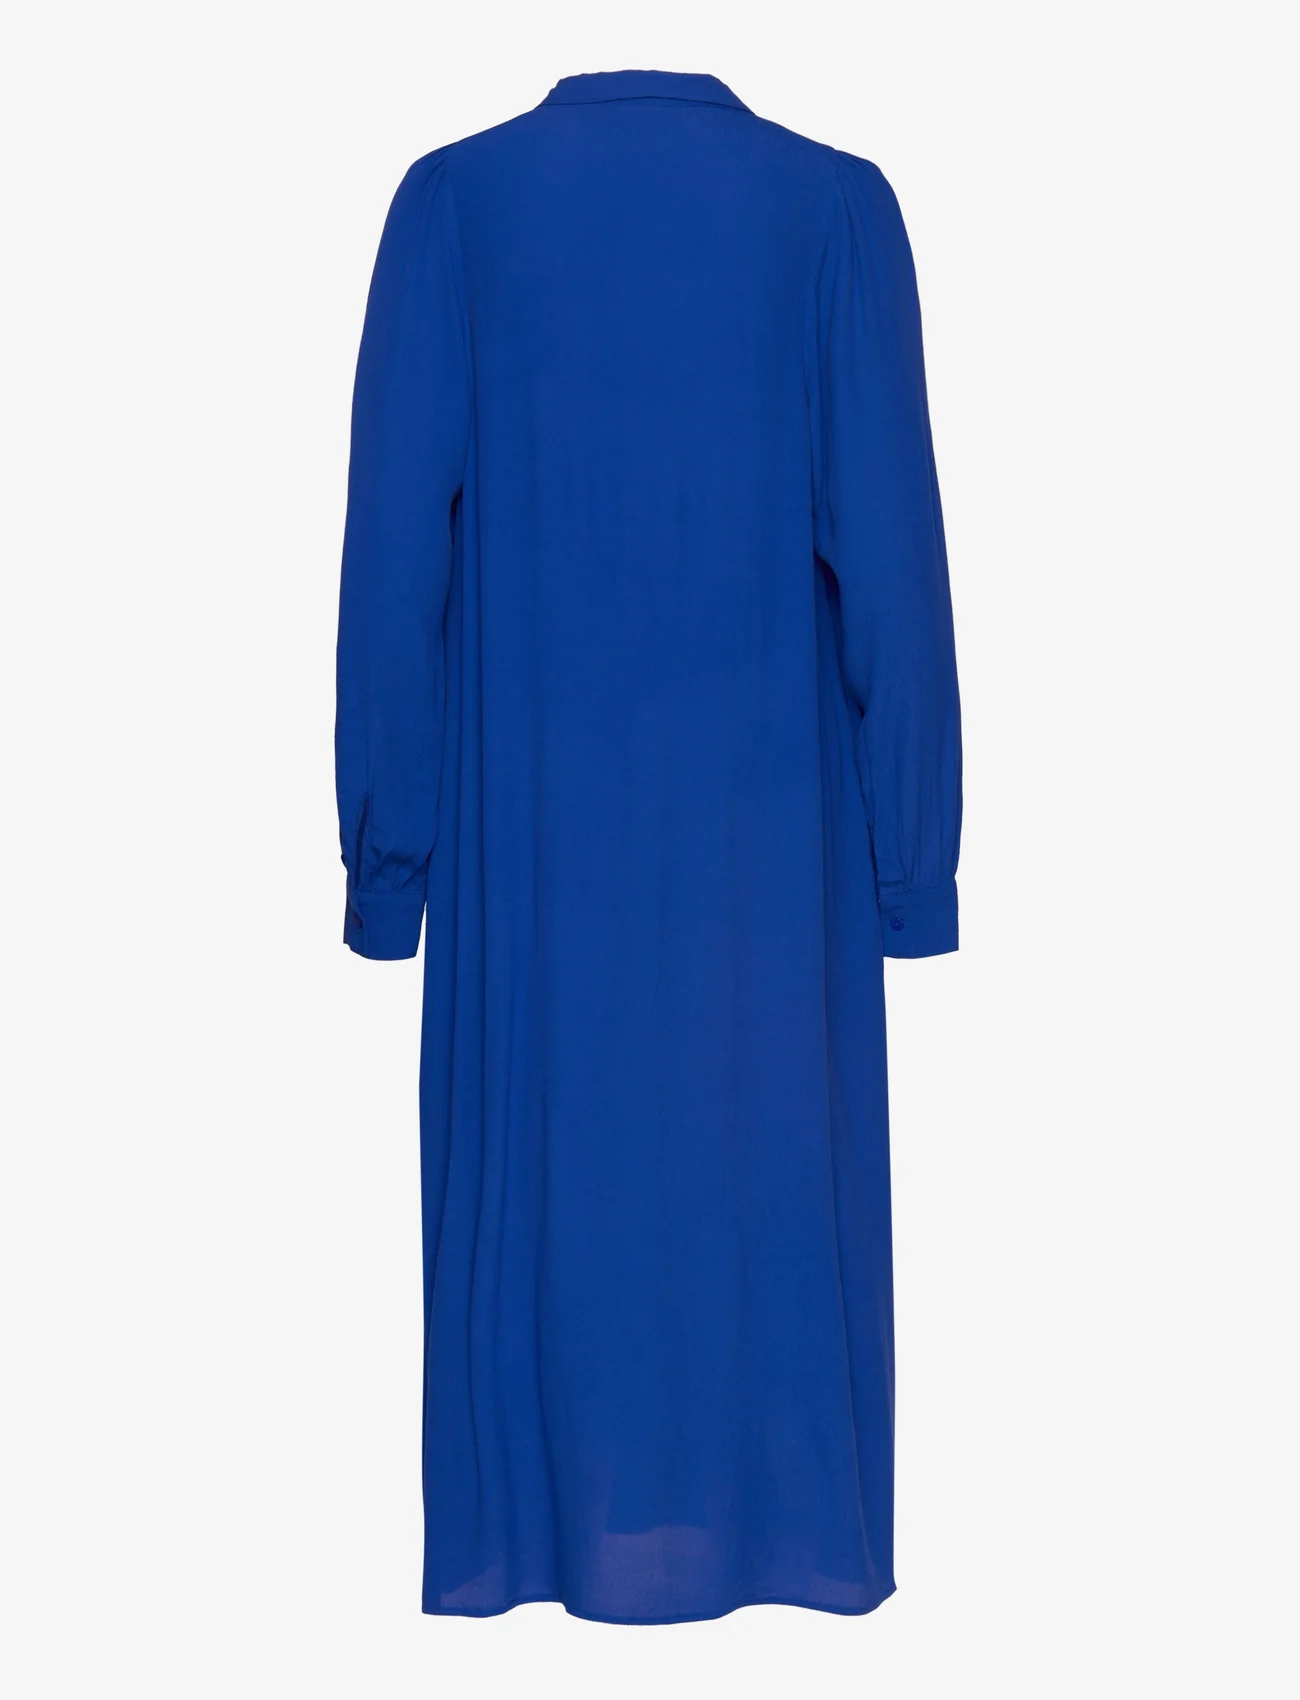 Coster Copenhagen - Dress with wide sleeves - midi dresses - electric blue - 1